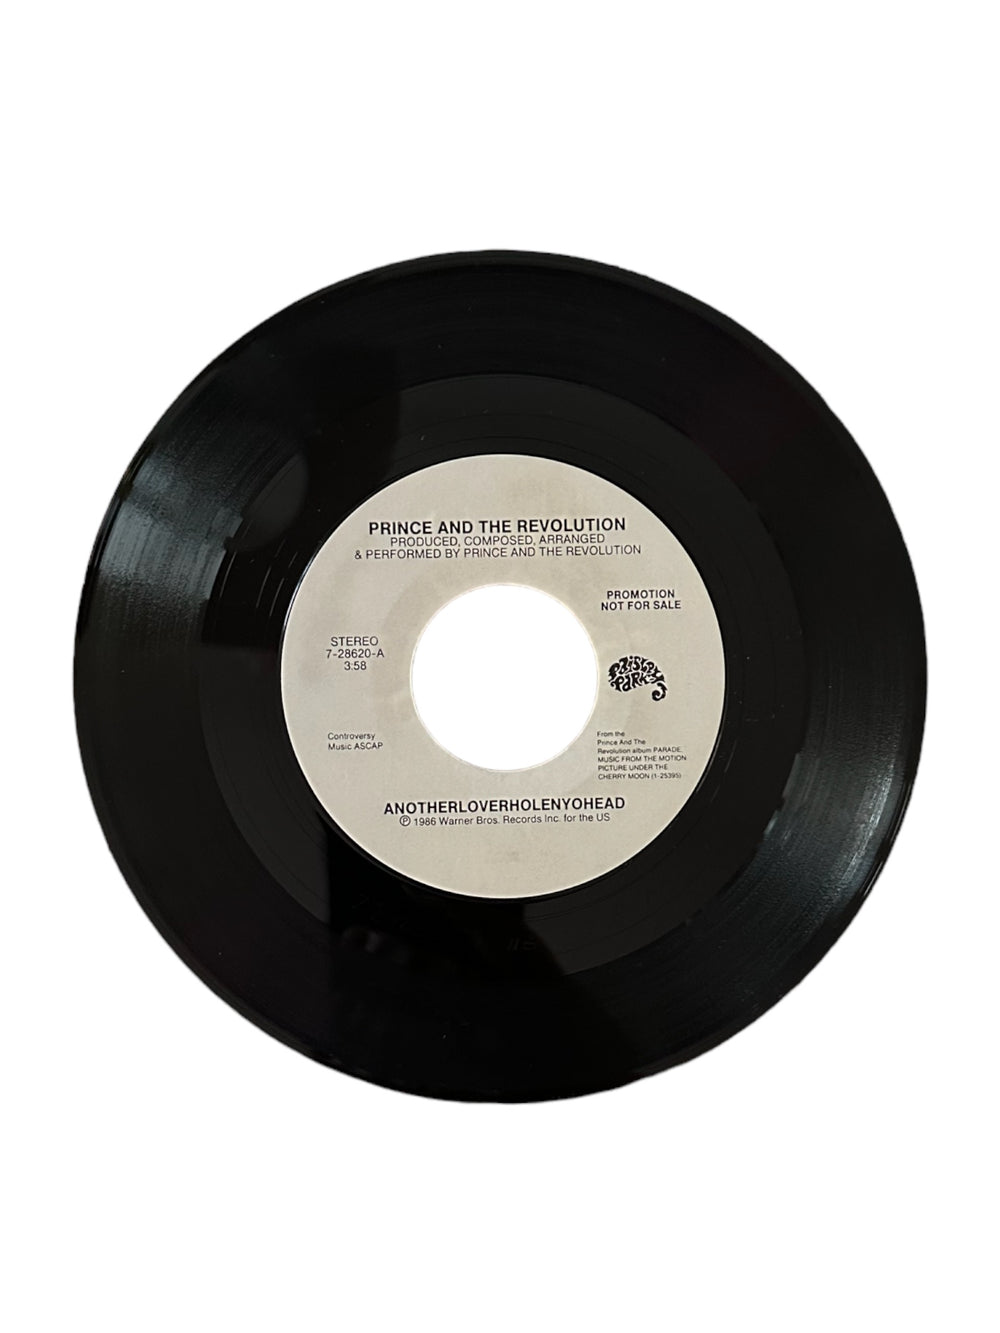 Prince – ANOTHERLOVER 7 Inch Vinyl Single USA Release Promotional